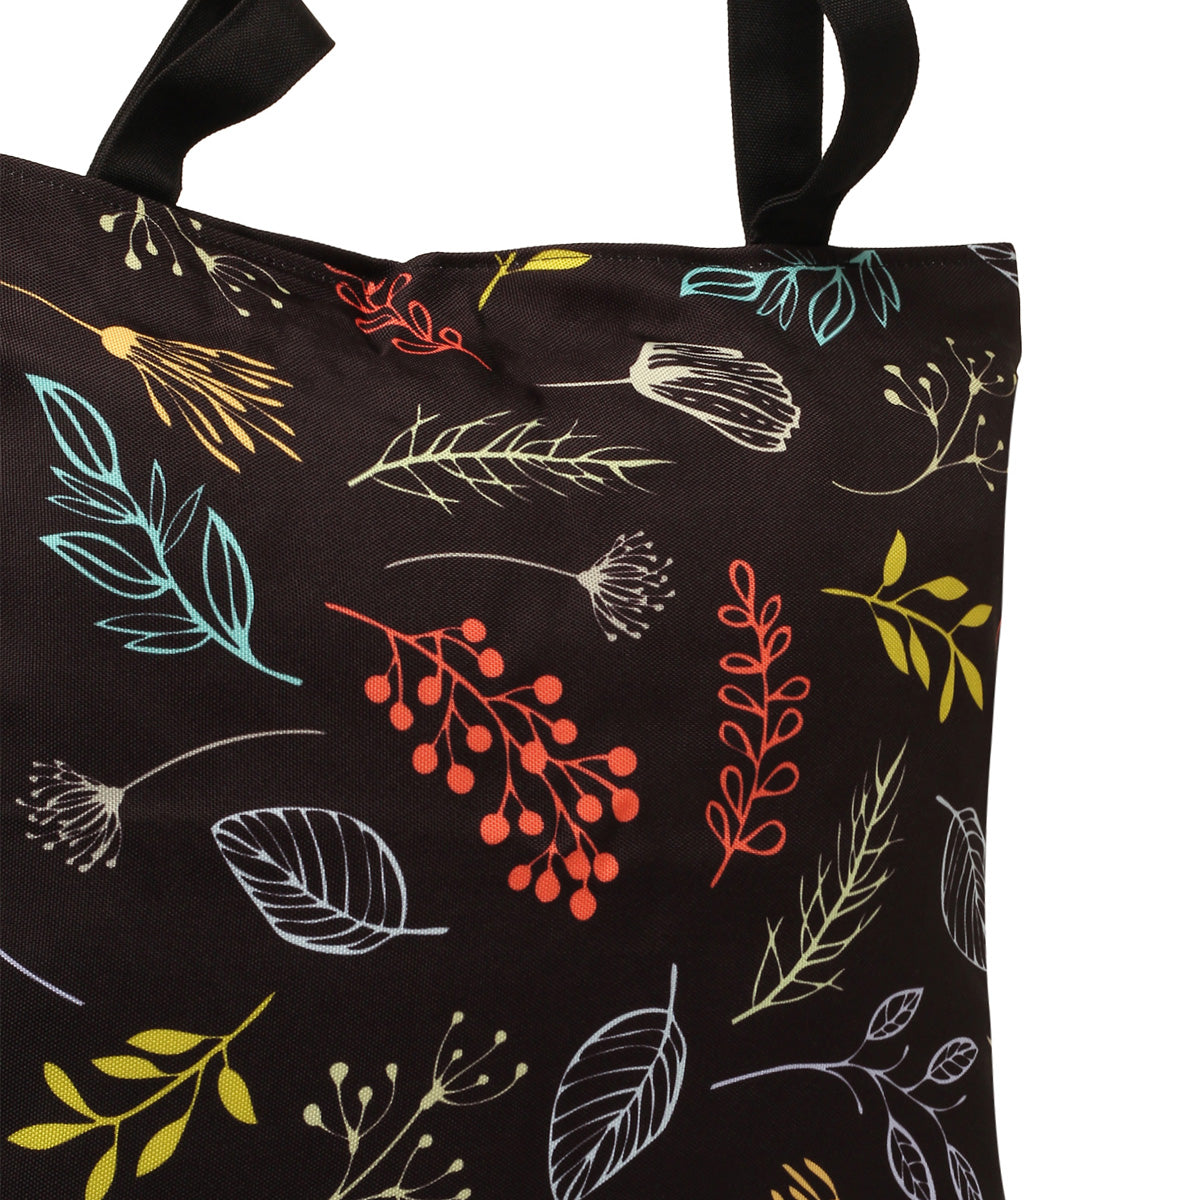 A black tote bag with a pop of colorful leaves and flowers